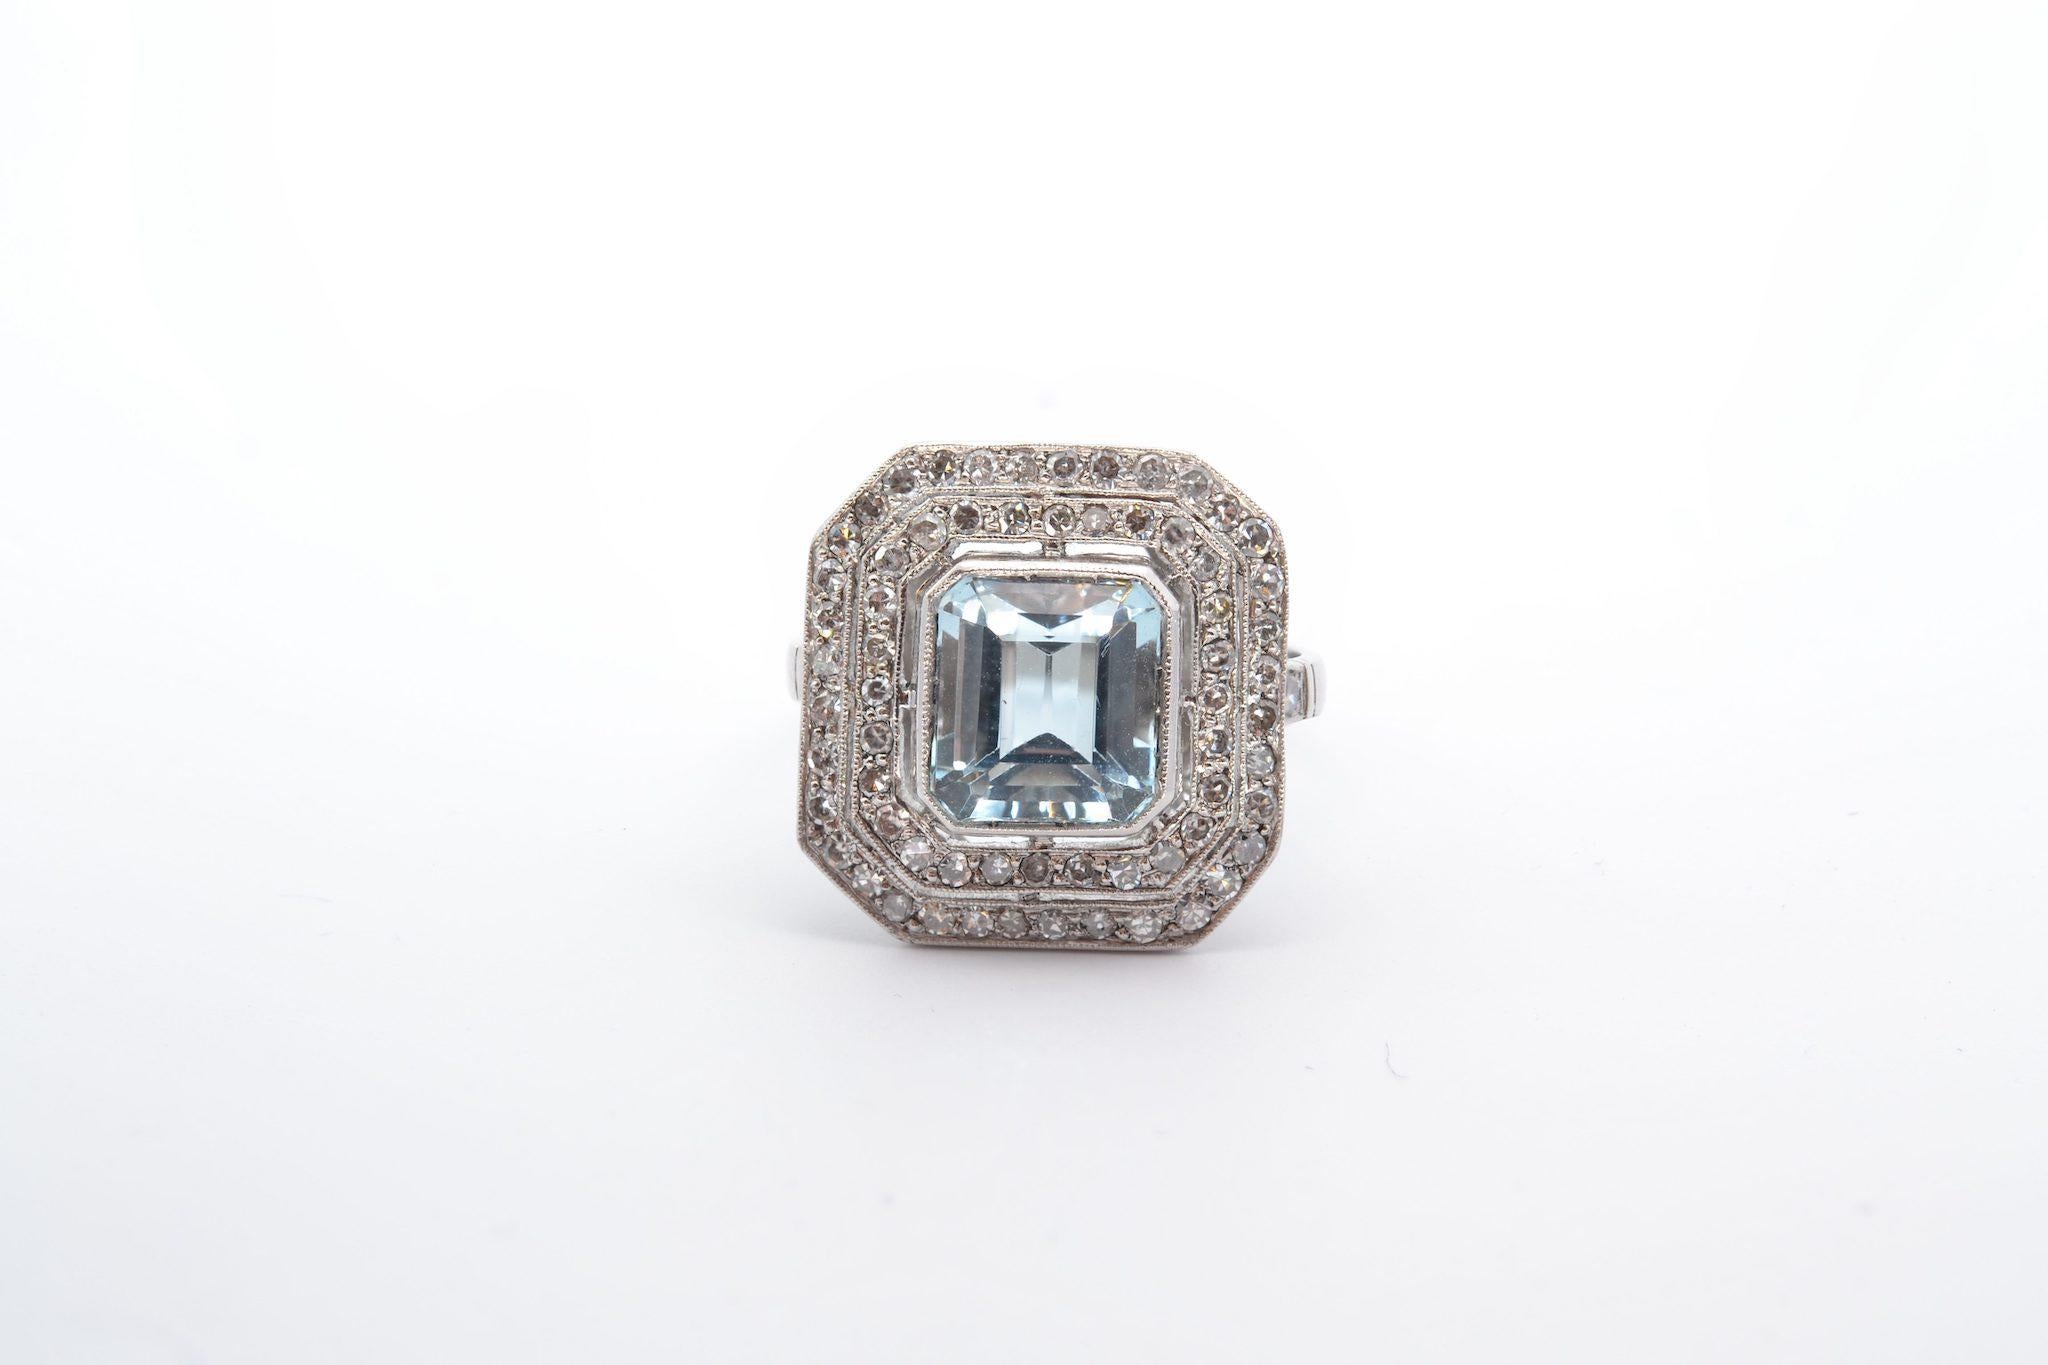 Stones: Aquamarine of 3.5cts, 64 diamonds: 0.96cts
Material: Platinum
Dimensions: 18mm x 18mm
Weight: 7.2g
Period: 1950
Size: 59 (free sizing)
Certificate
Ref. : 25078